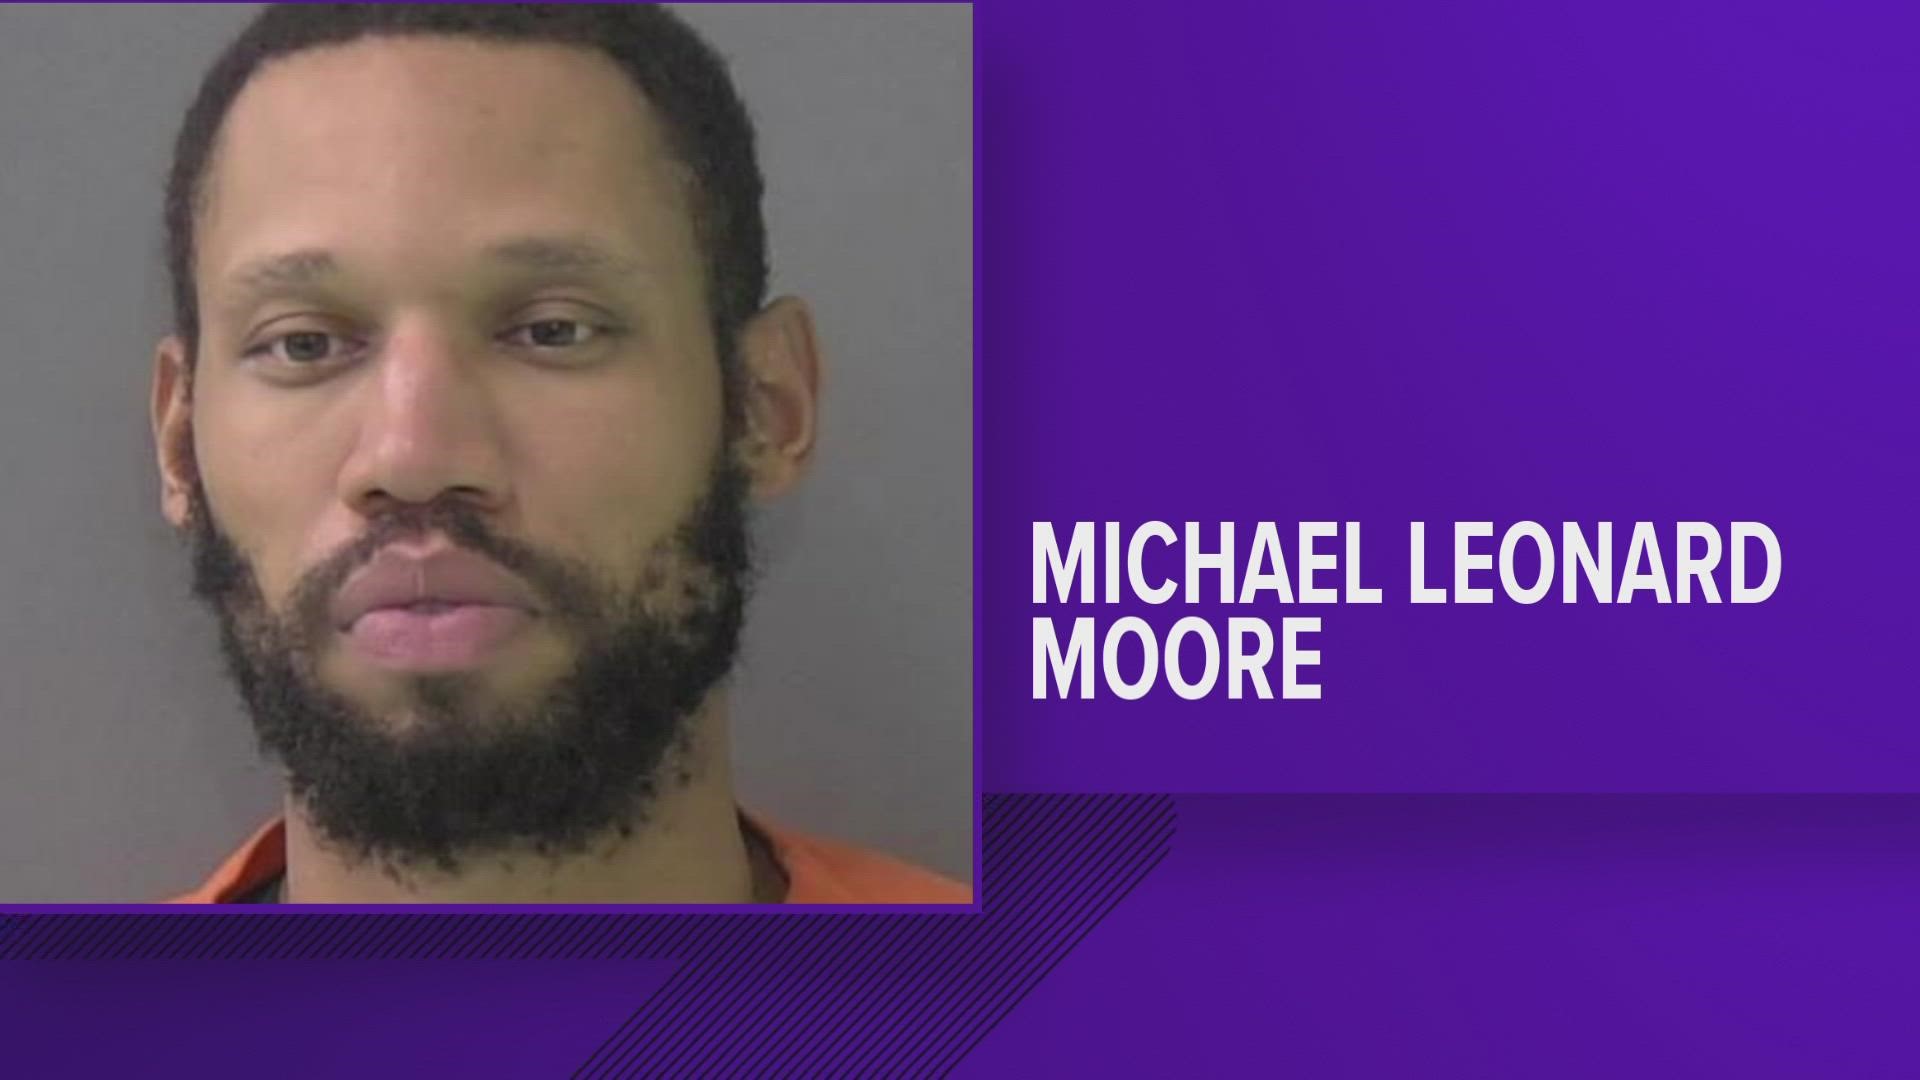 Michael Leonard Moore confessed to shooting his 34-year-old girlfriend on Sept. 19 inside a Killeen home, the affidavit states.